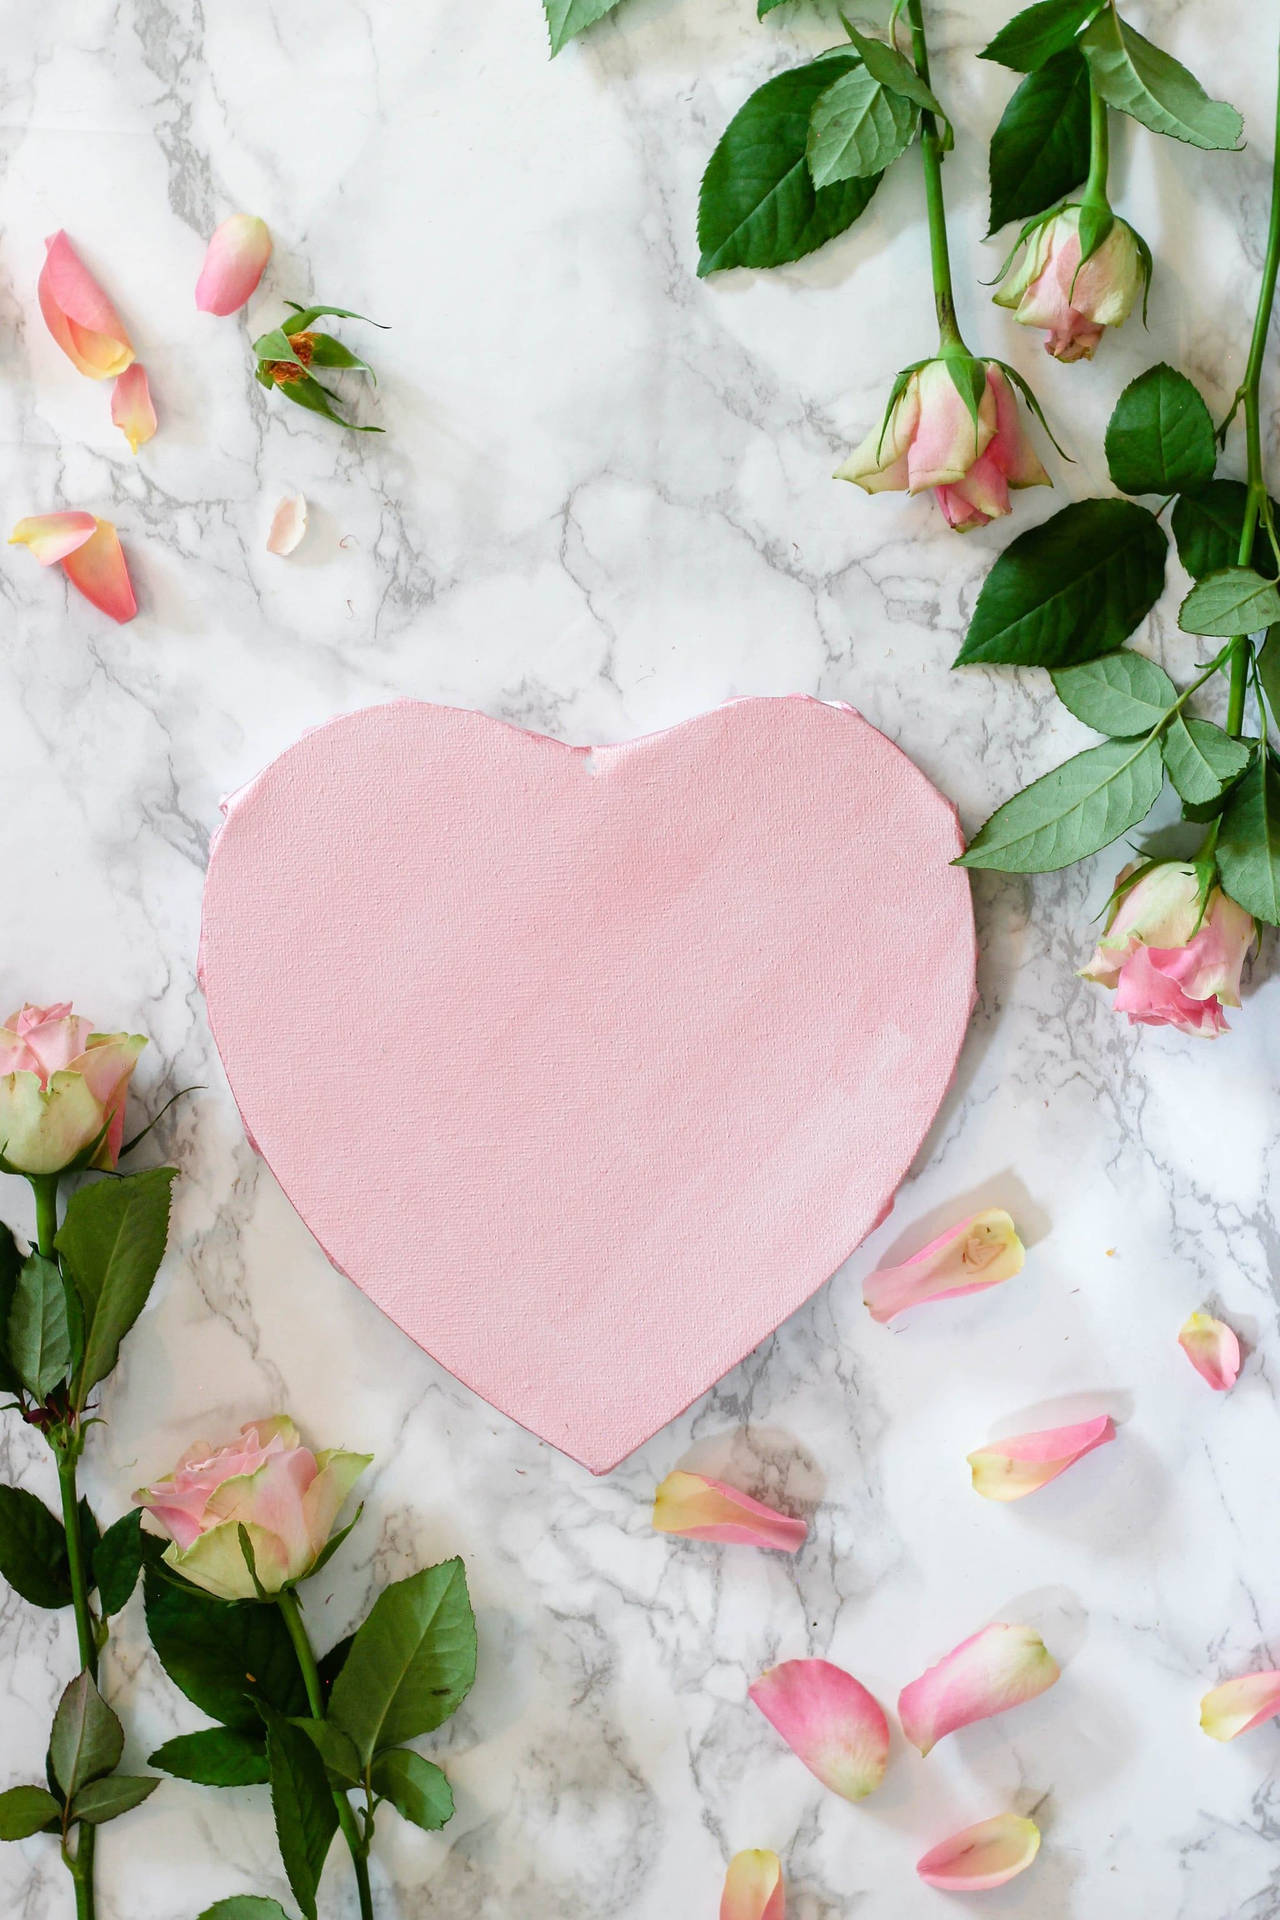 Pastel Pink Heart Plate With Roses